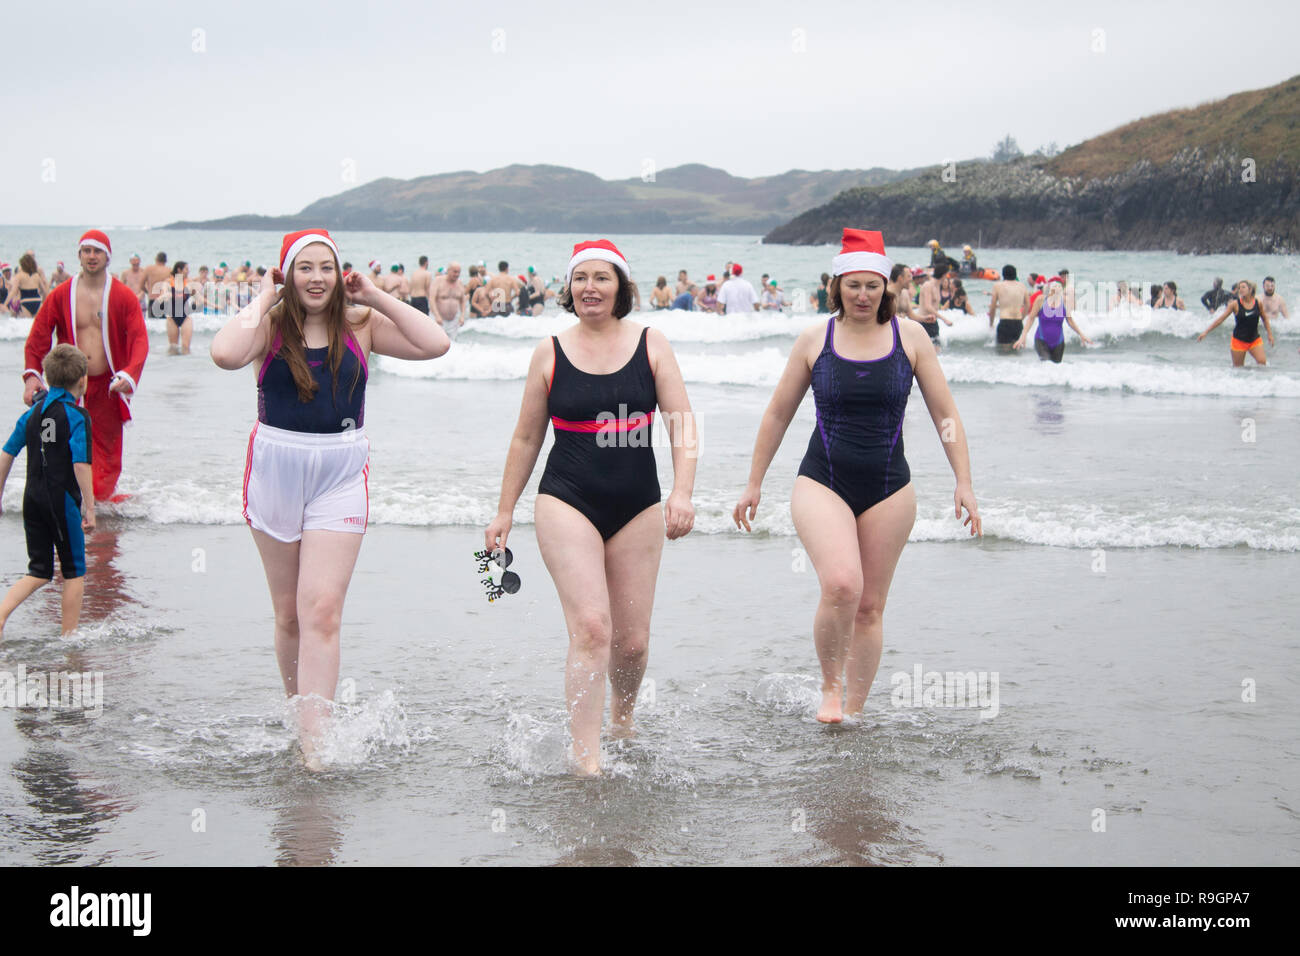 Tragumna, West Cork, Ireland, December 25th 2018. A mild Christmas morning greeted the annual crowds for the traditional swim on Tragumna beach. Credit: aphperspective/Alamy Live News Stock Photo